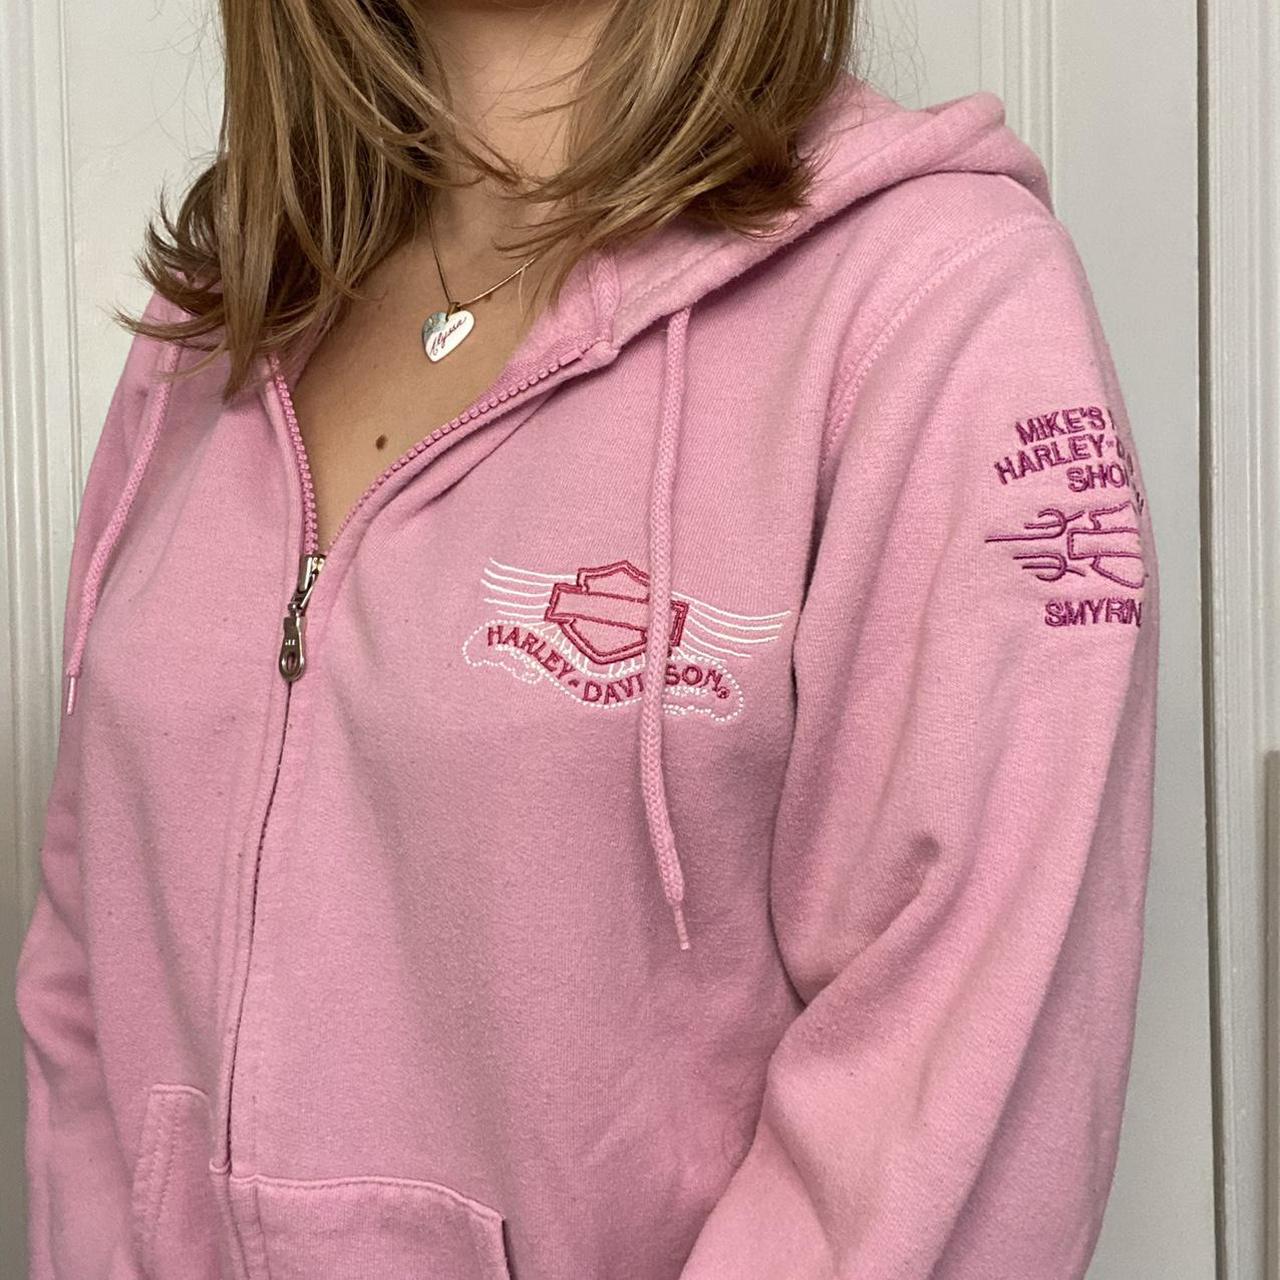 Product Image 1 - ֎The cutest pink zip up